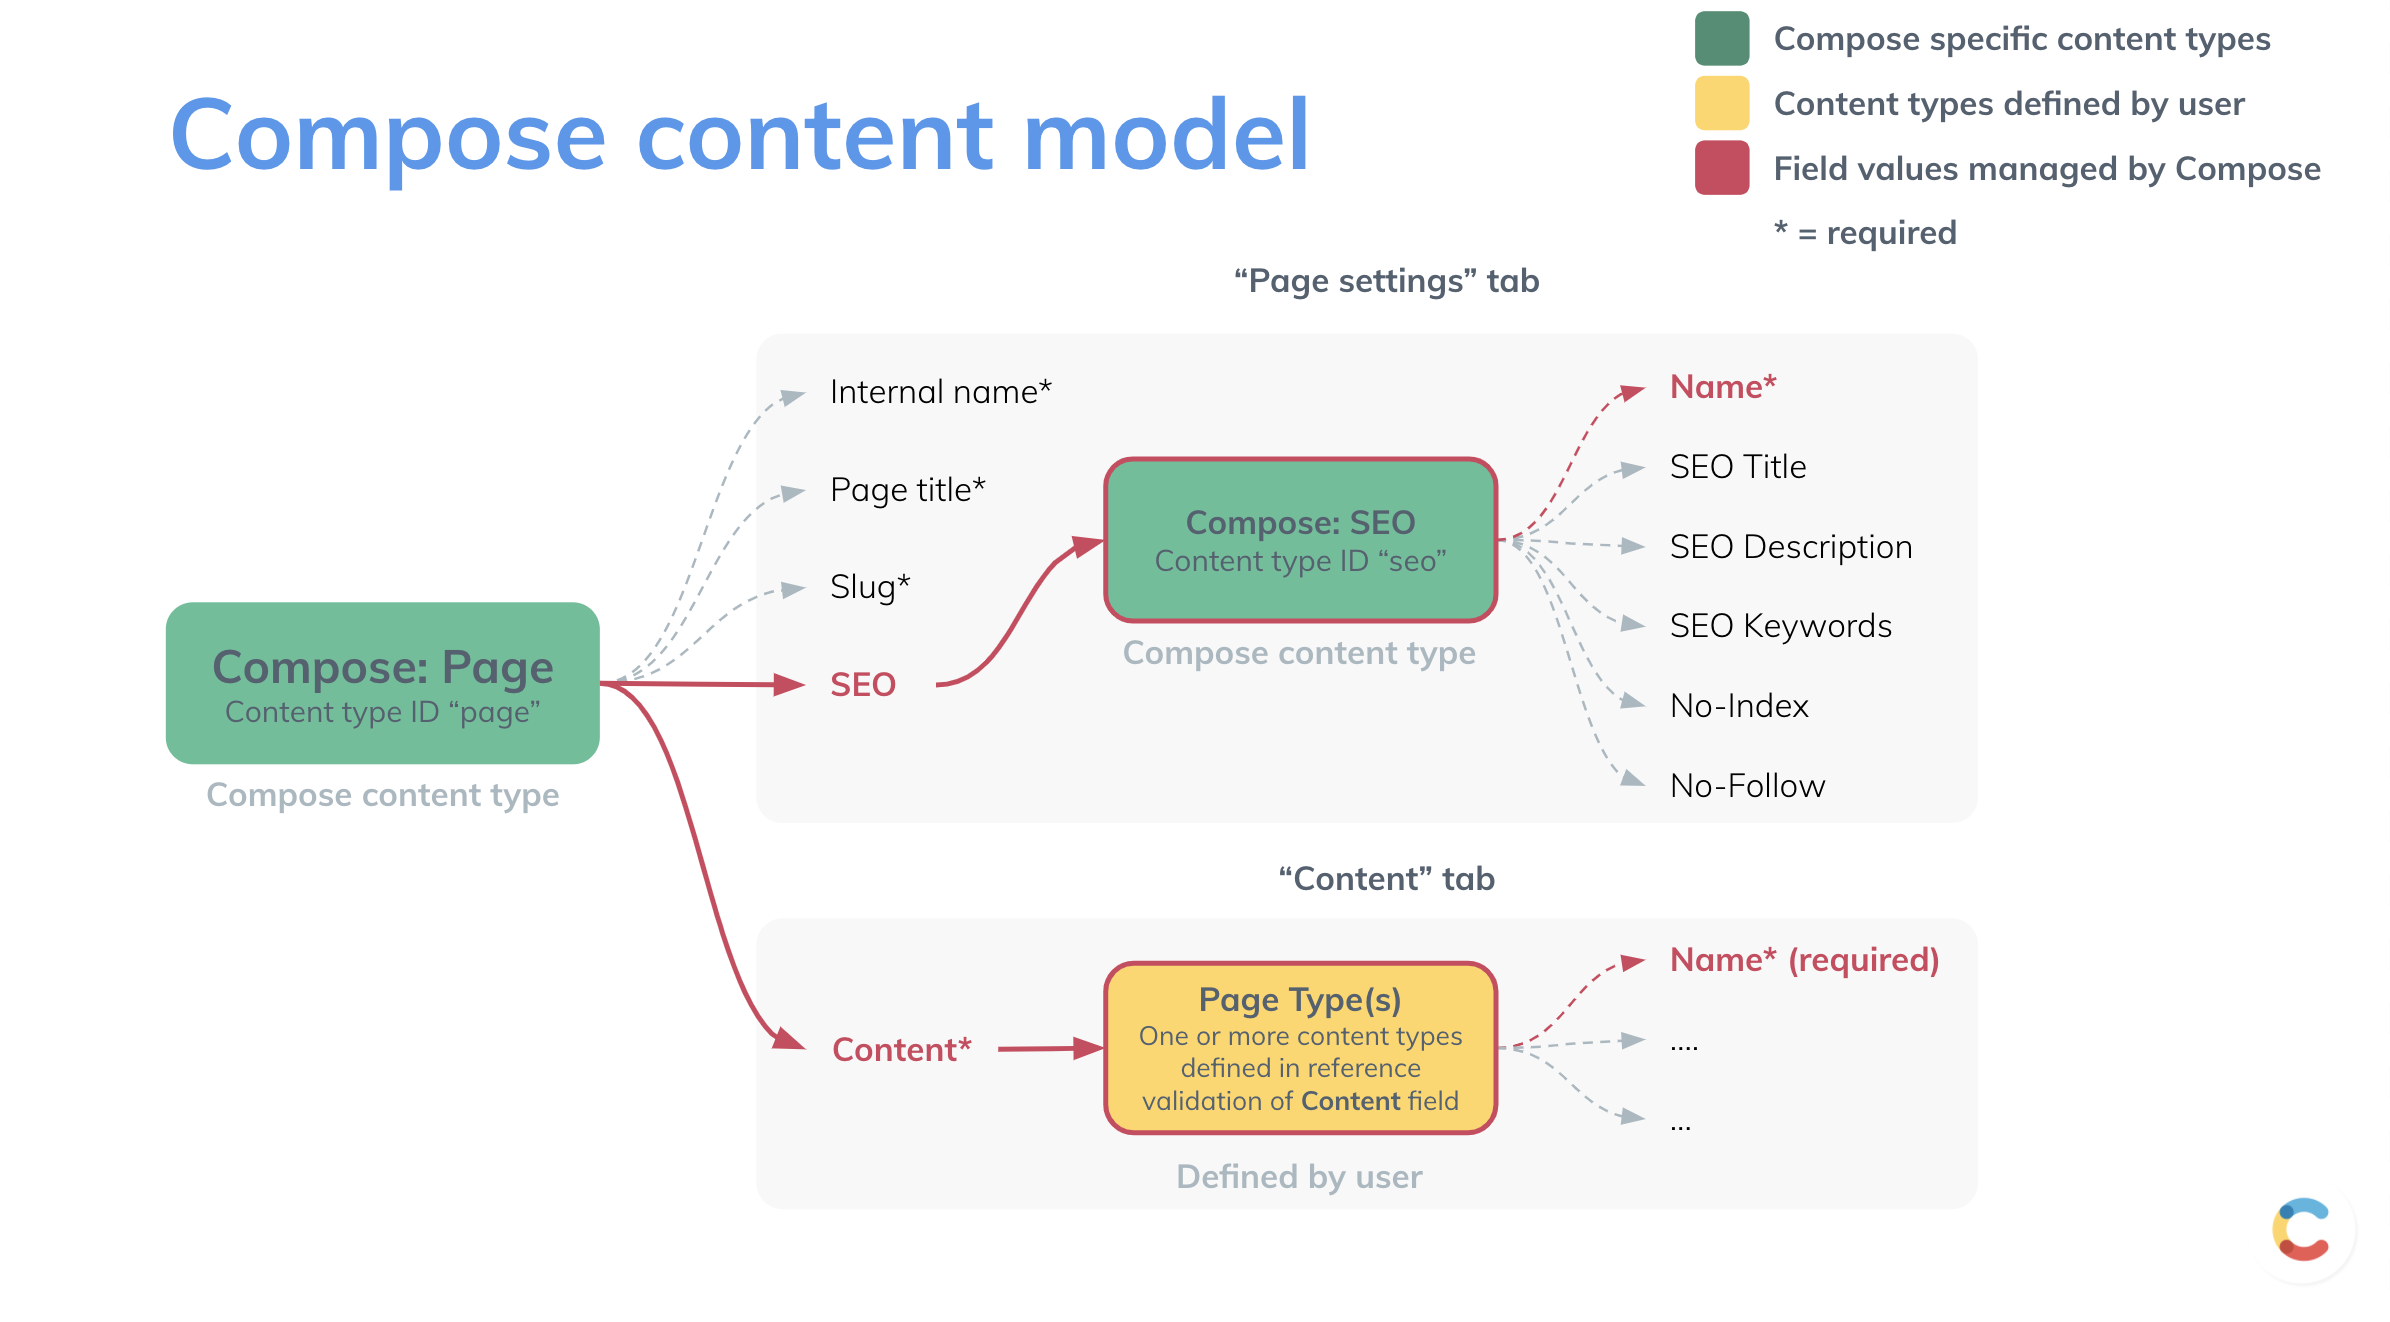 Overview of the Compose content model